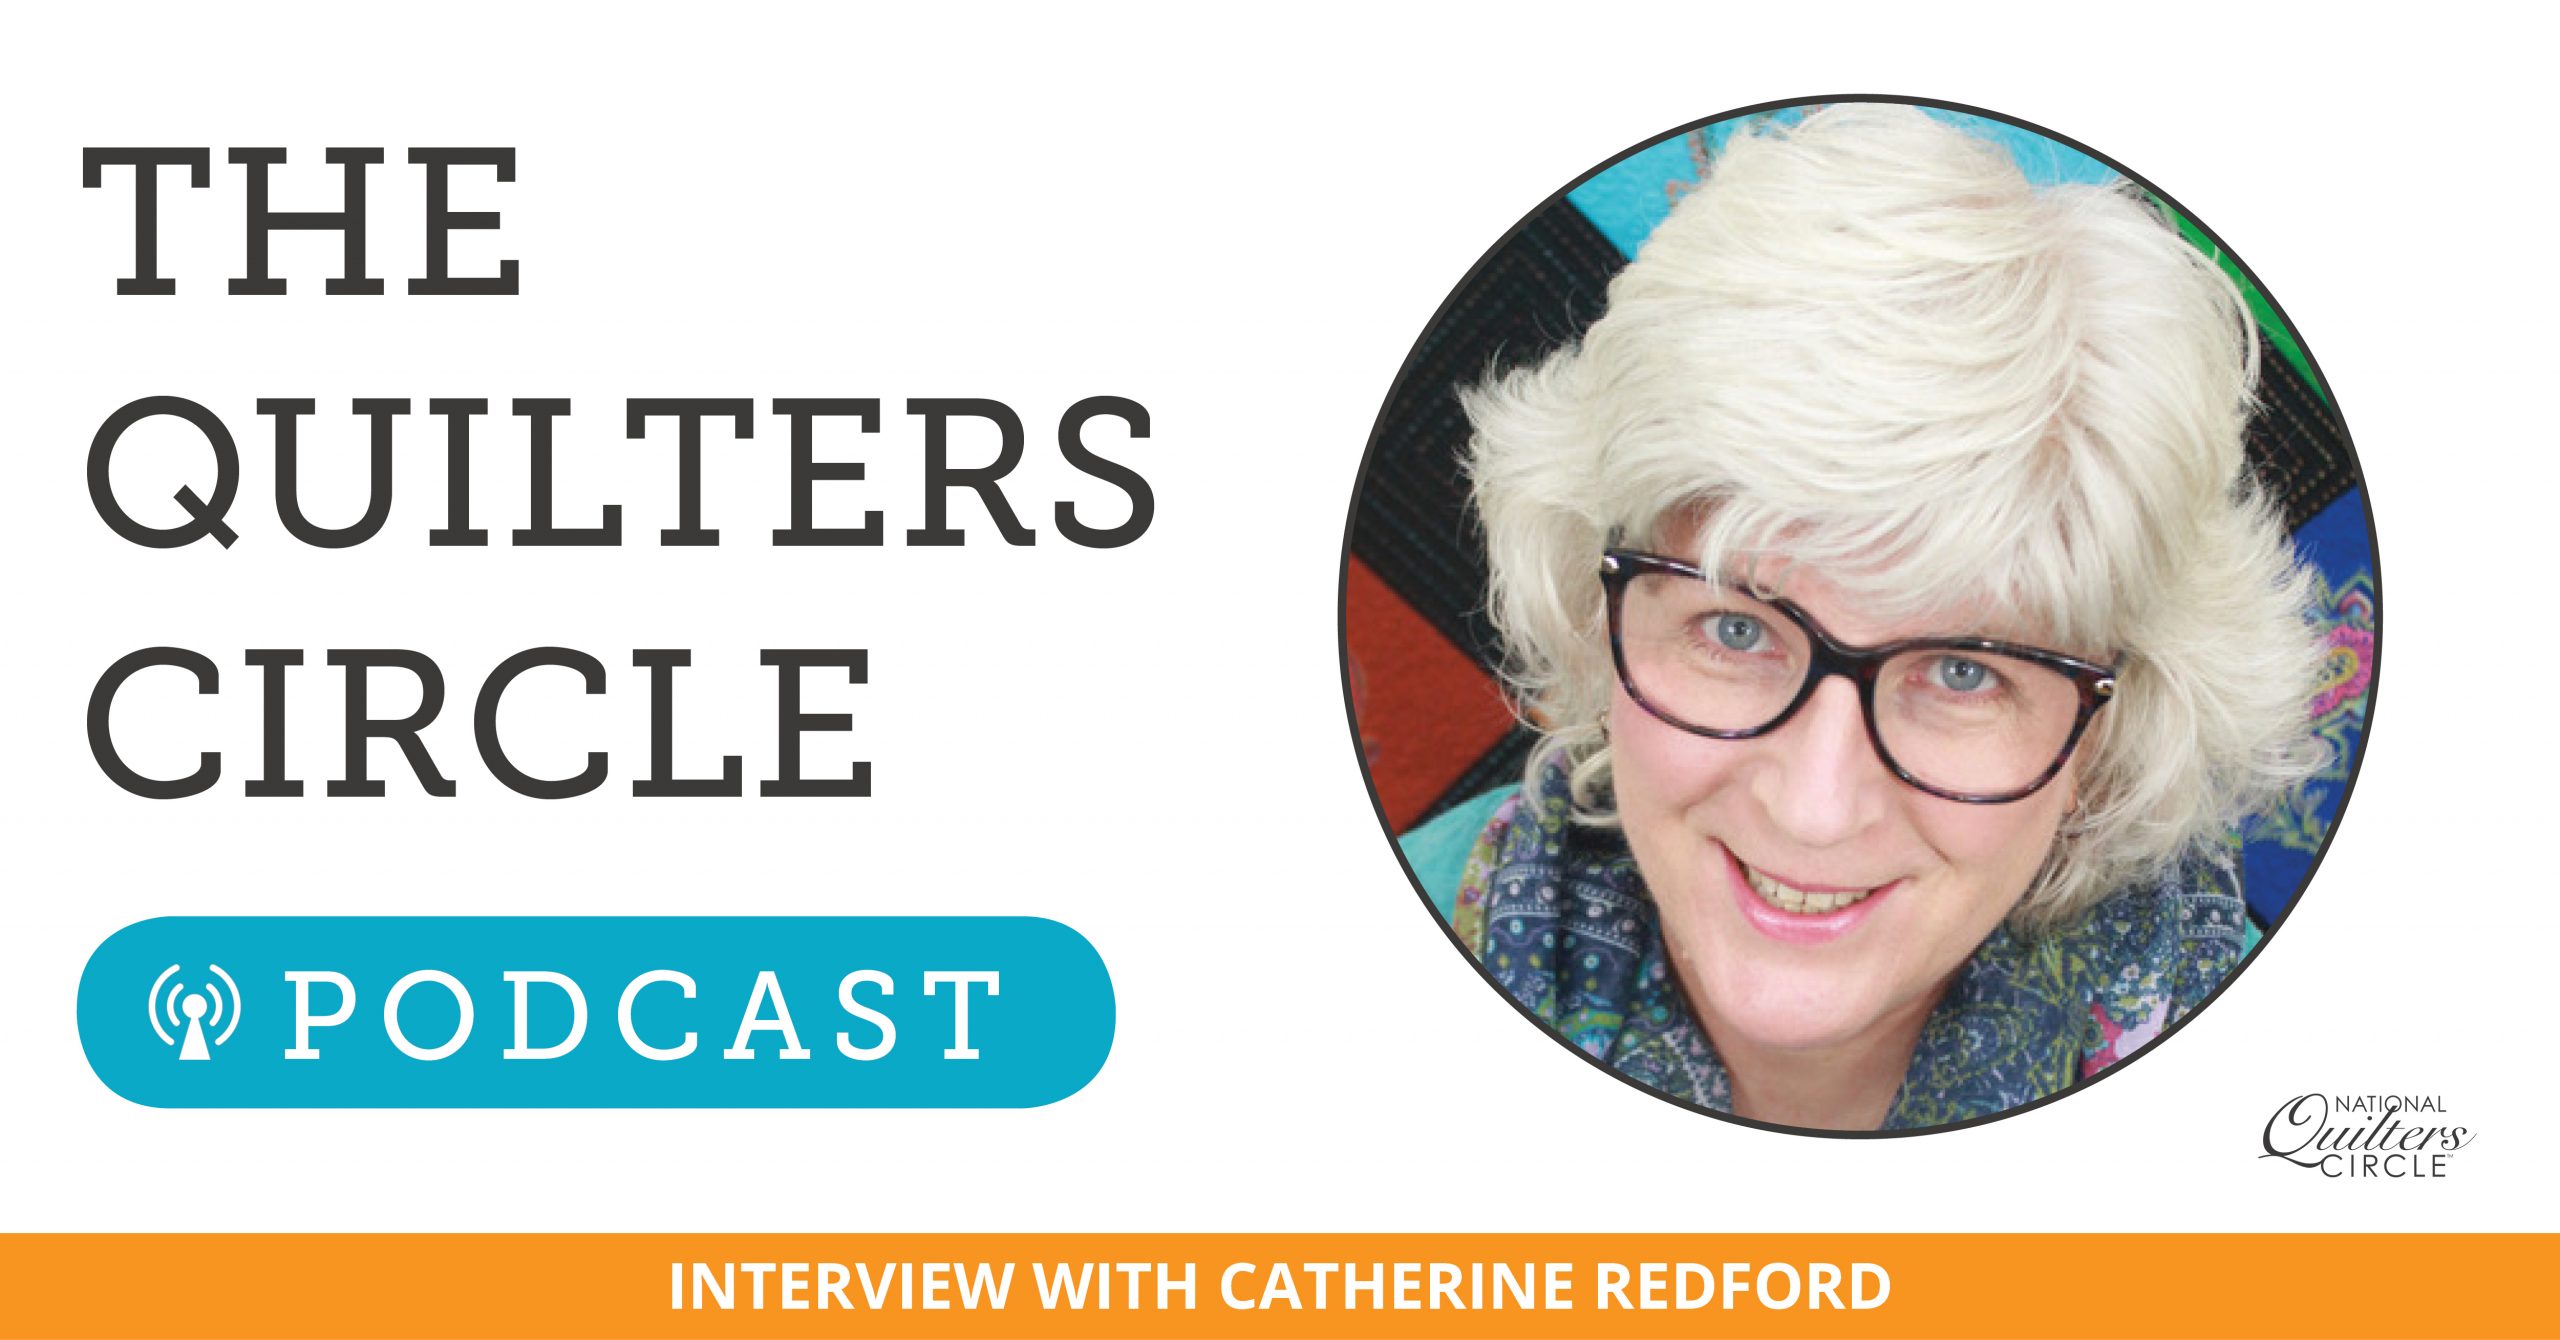 The Quilter's Circle Podcast text with a women in glasses smiling